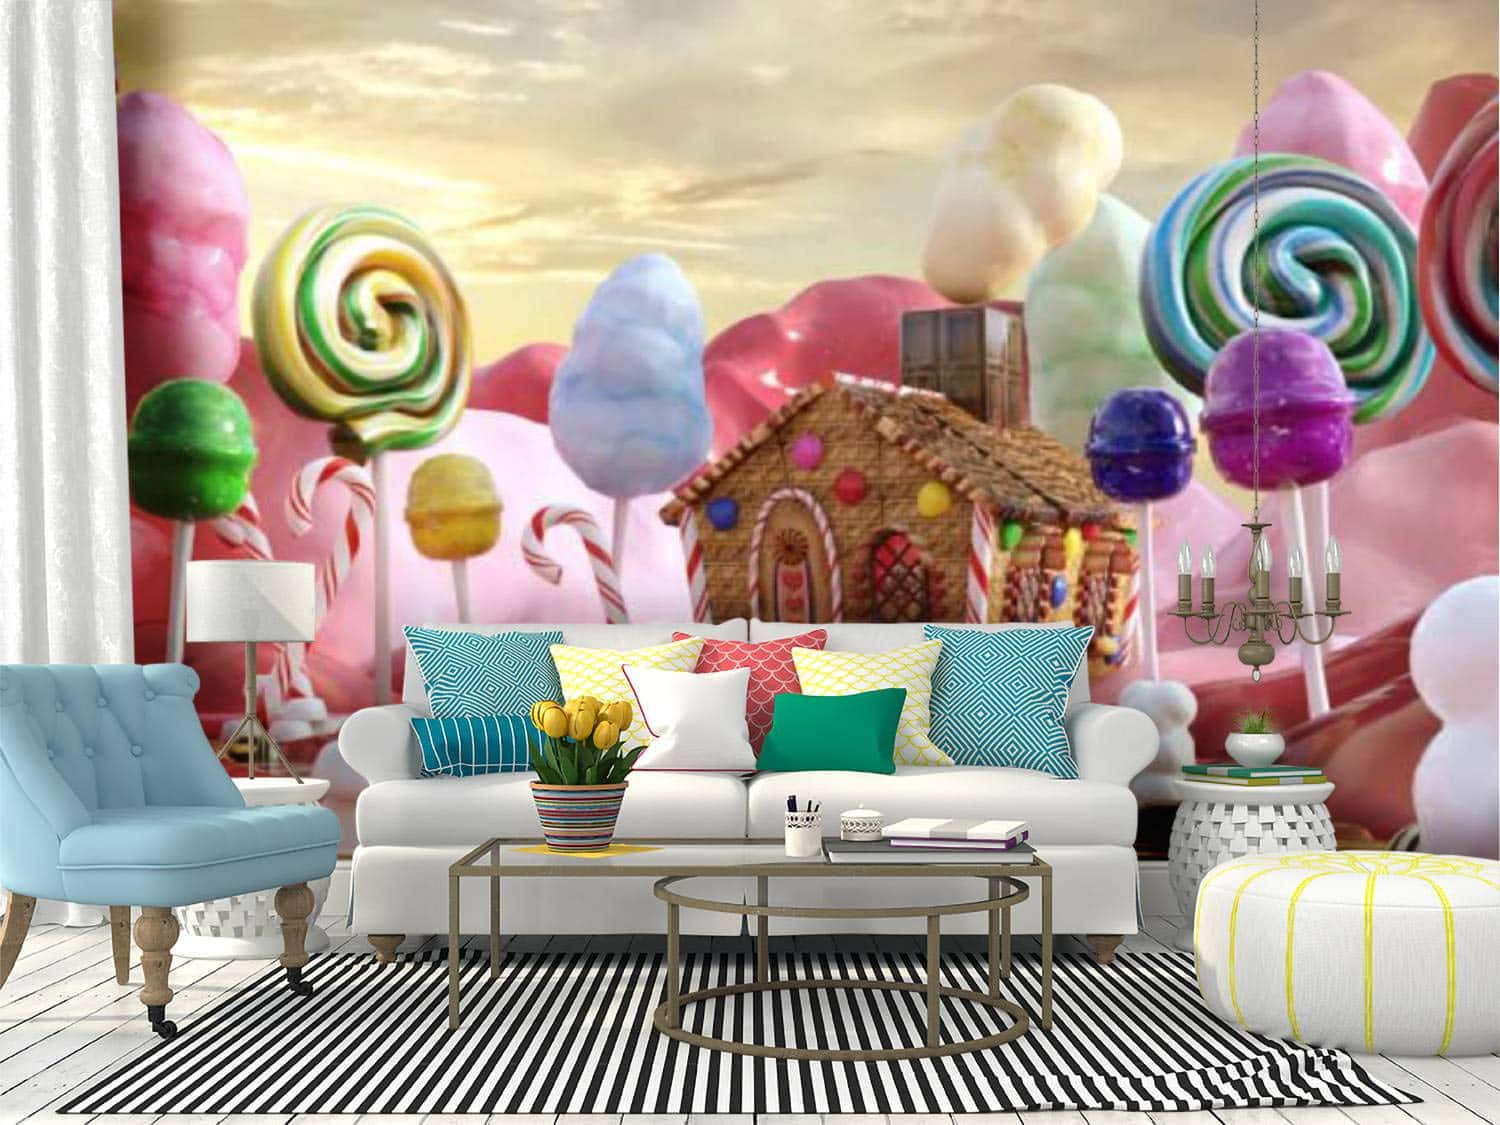 A world of sugary sweetness awaits in Candy Land. Wallpaper